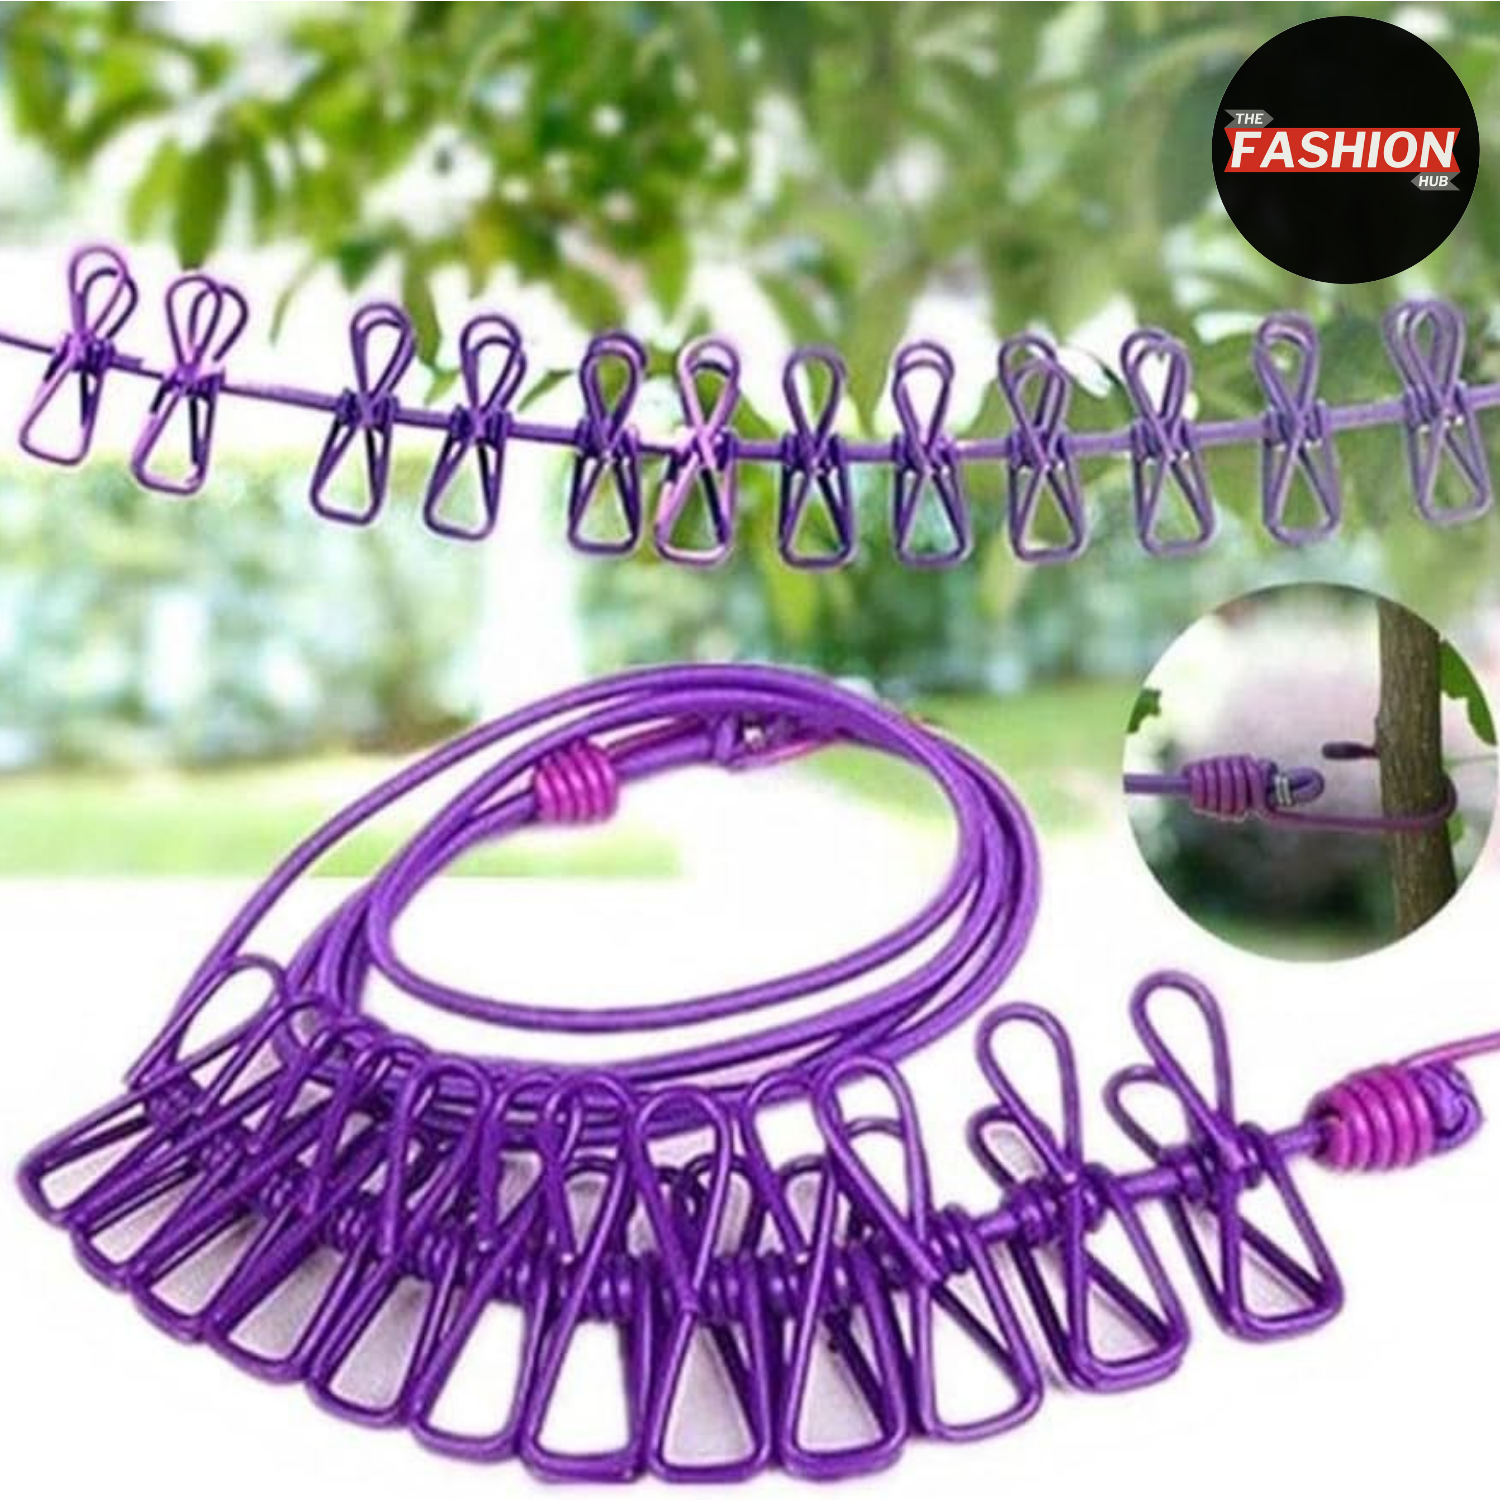 1Pcs Clothesline Rope Elastic Cloth Drying Hanging Rope with 12 Clips and 2 Hooks Travel Clothesline Hanging Laundry Drying Rope | 1pcs (Random Colour)